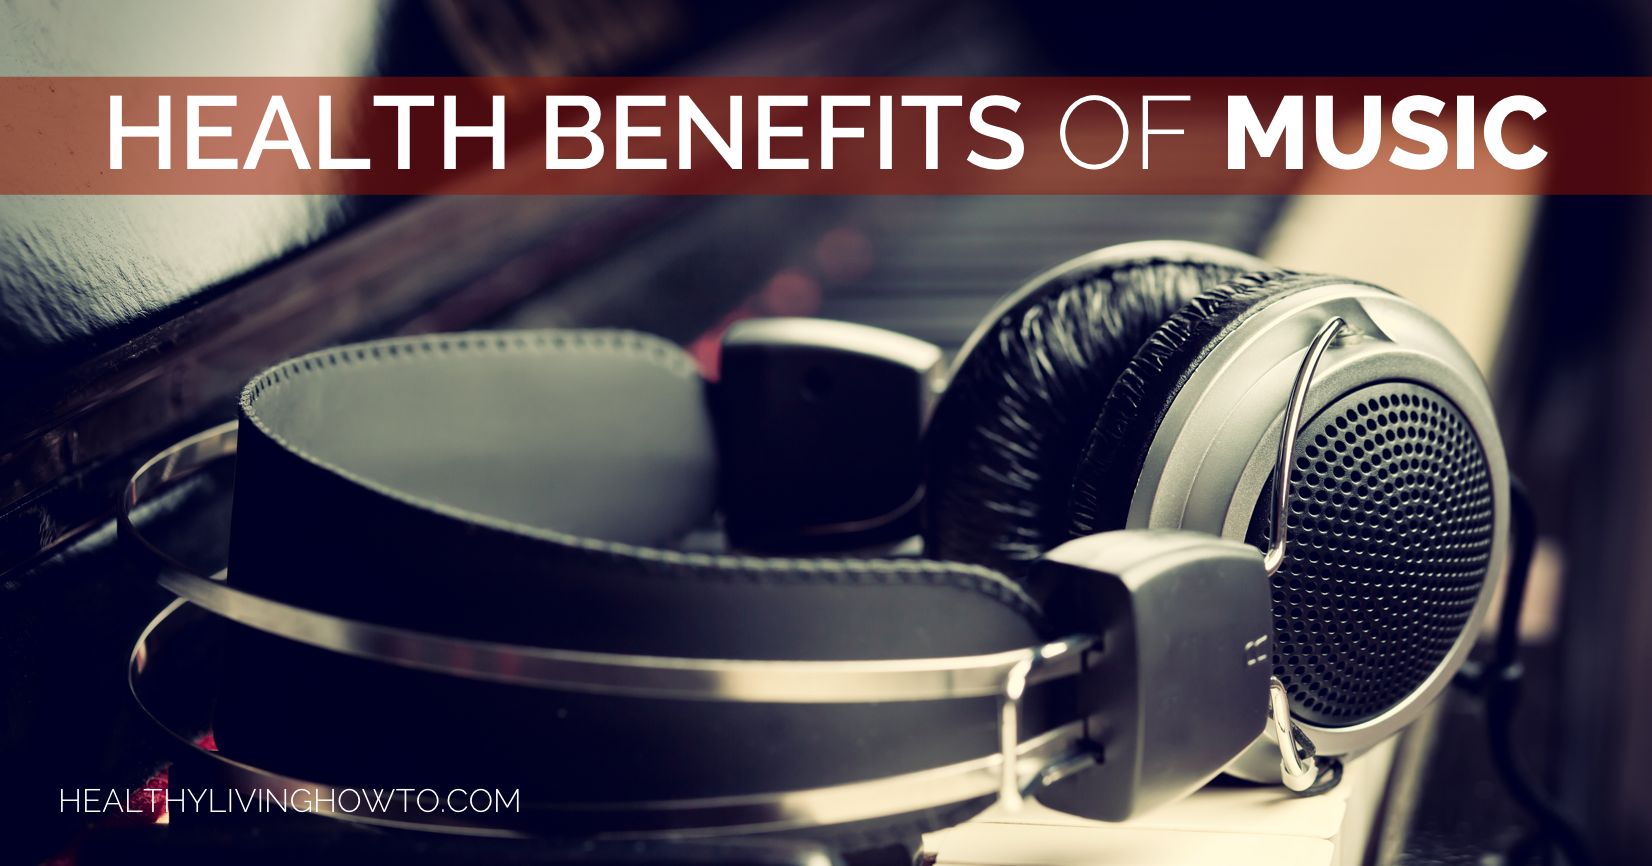 Health Benefits of Music | healthylivinghowto.com